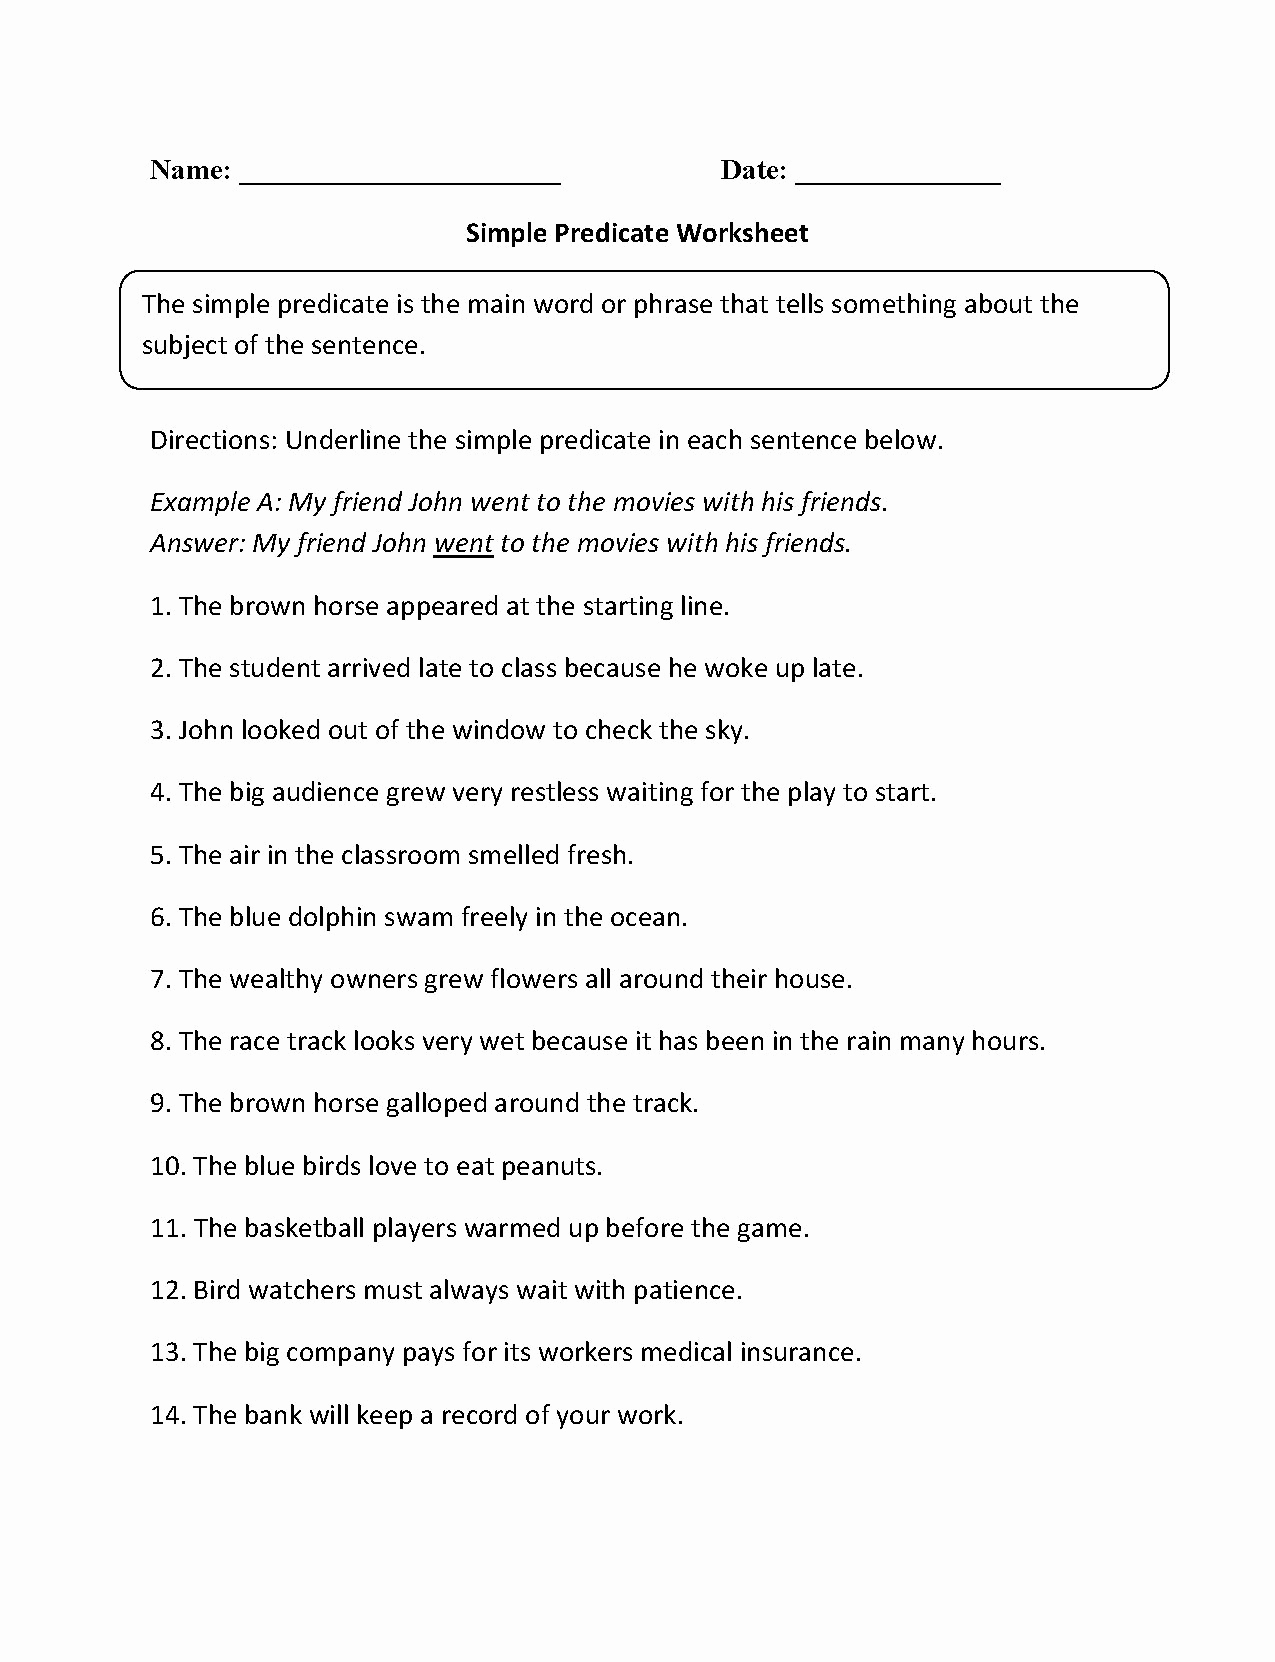 Free Subject and Predicate Worksheets Awesome Subject Predicate Worksheet Pdf Fresh Plete Subjects